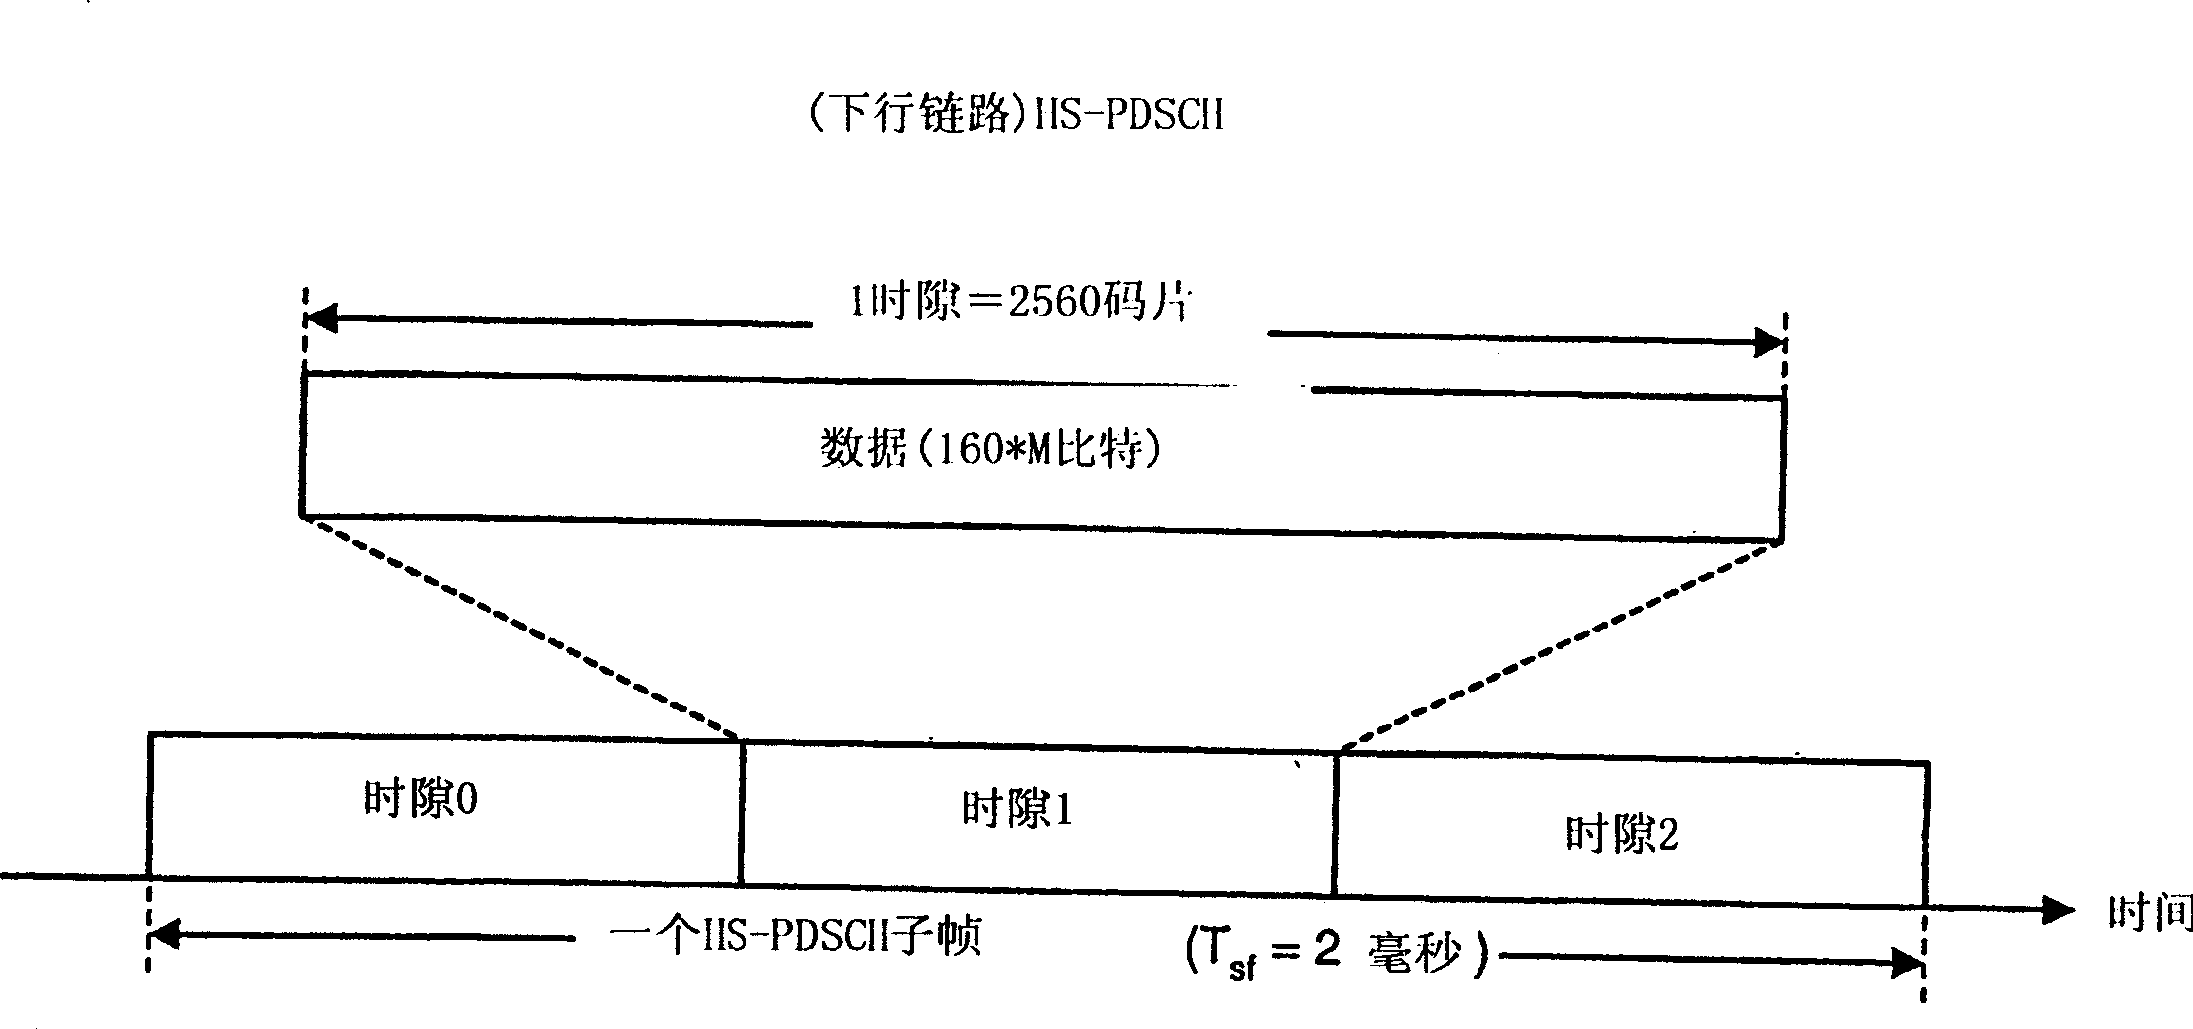 Method to check communication link reliability